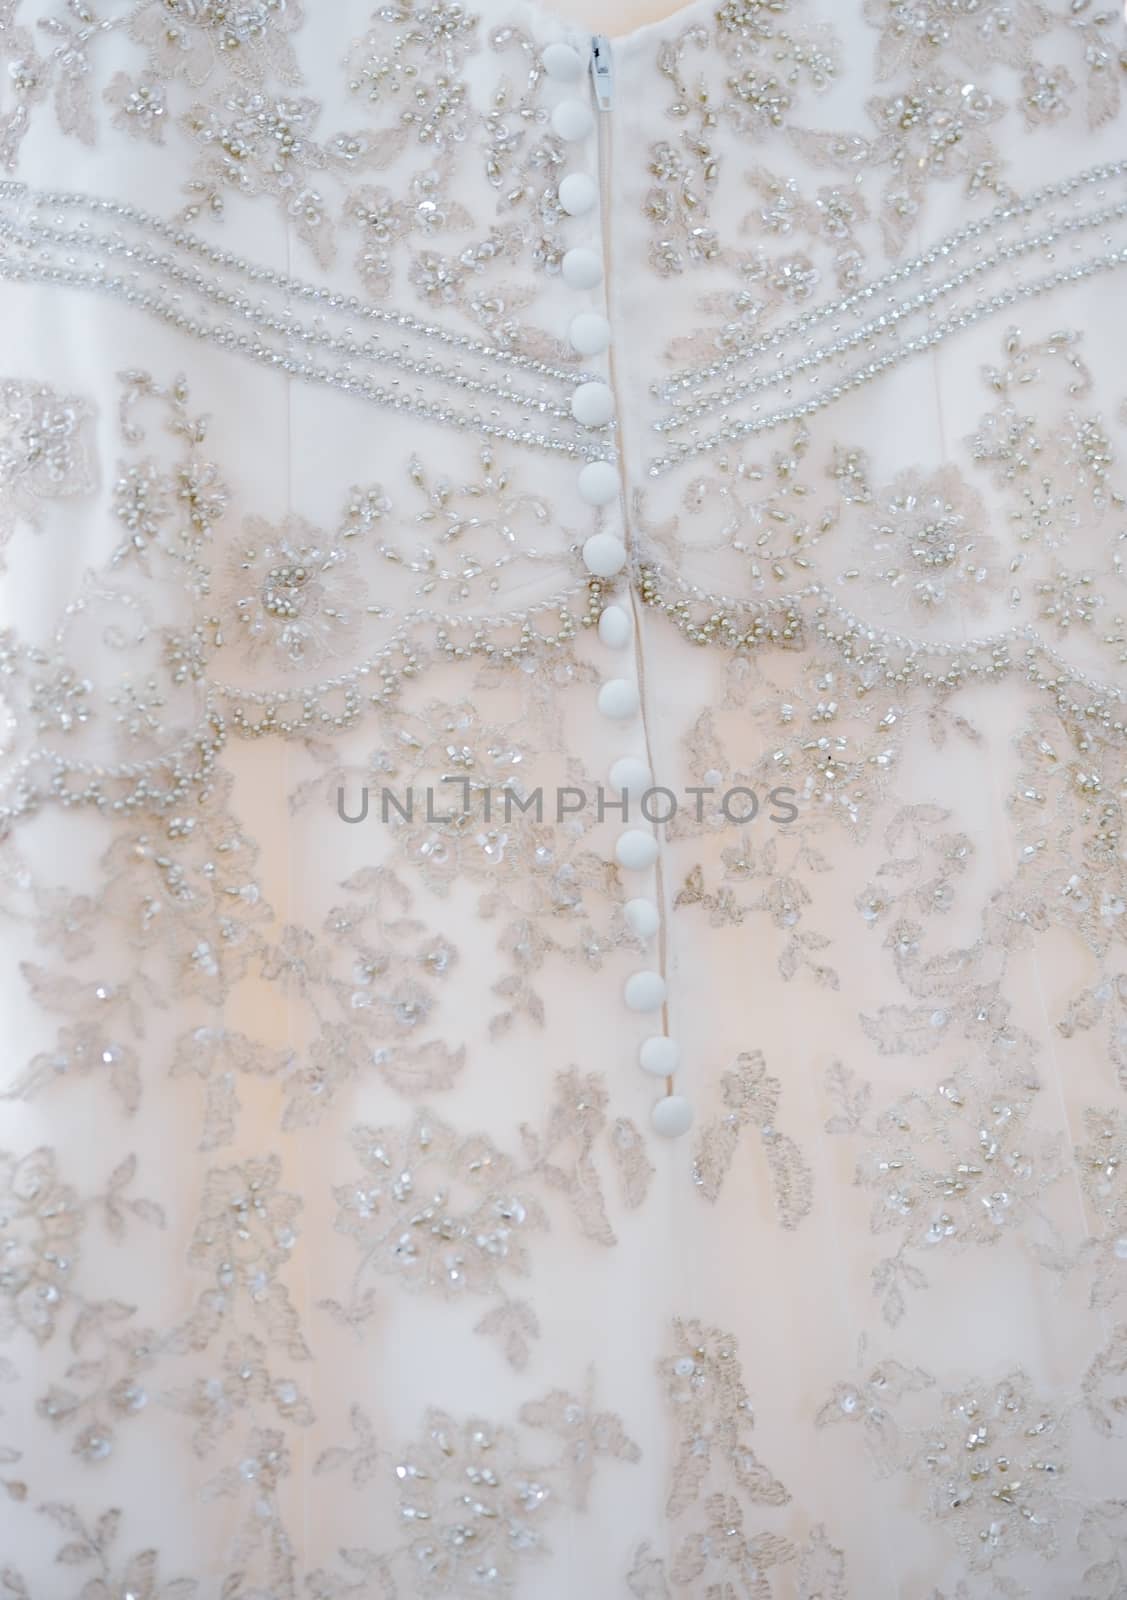 Close-up of brides dress detail on wedding day